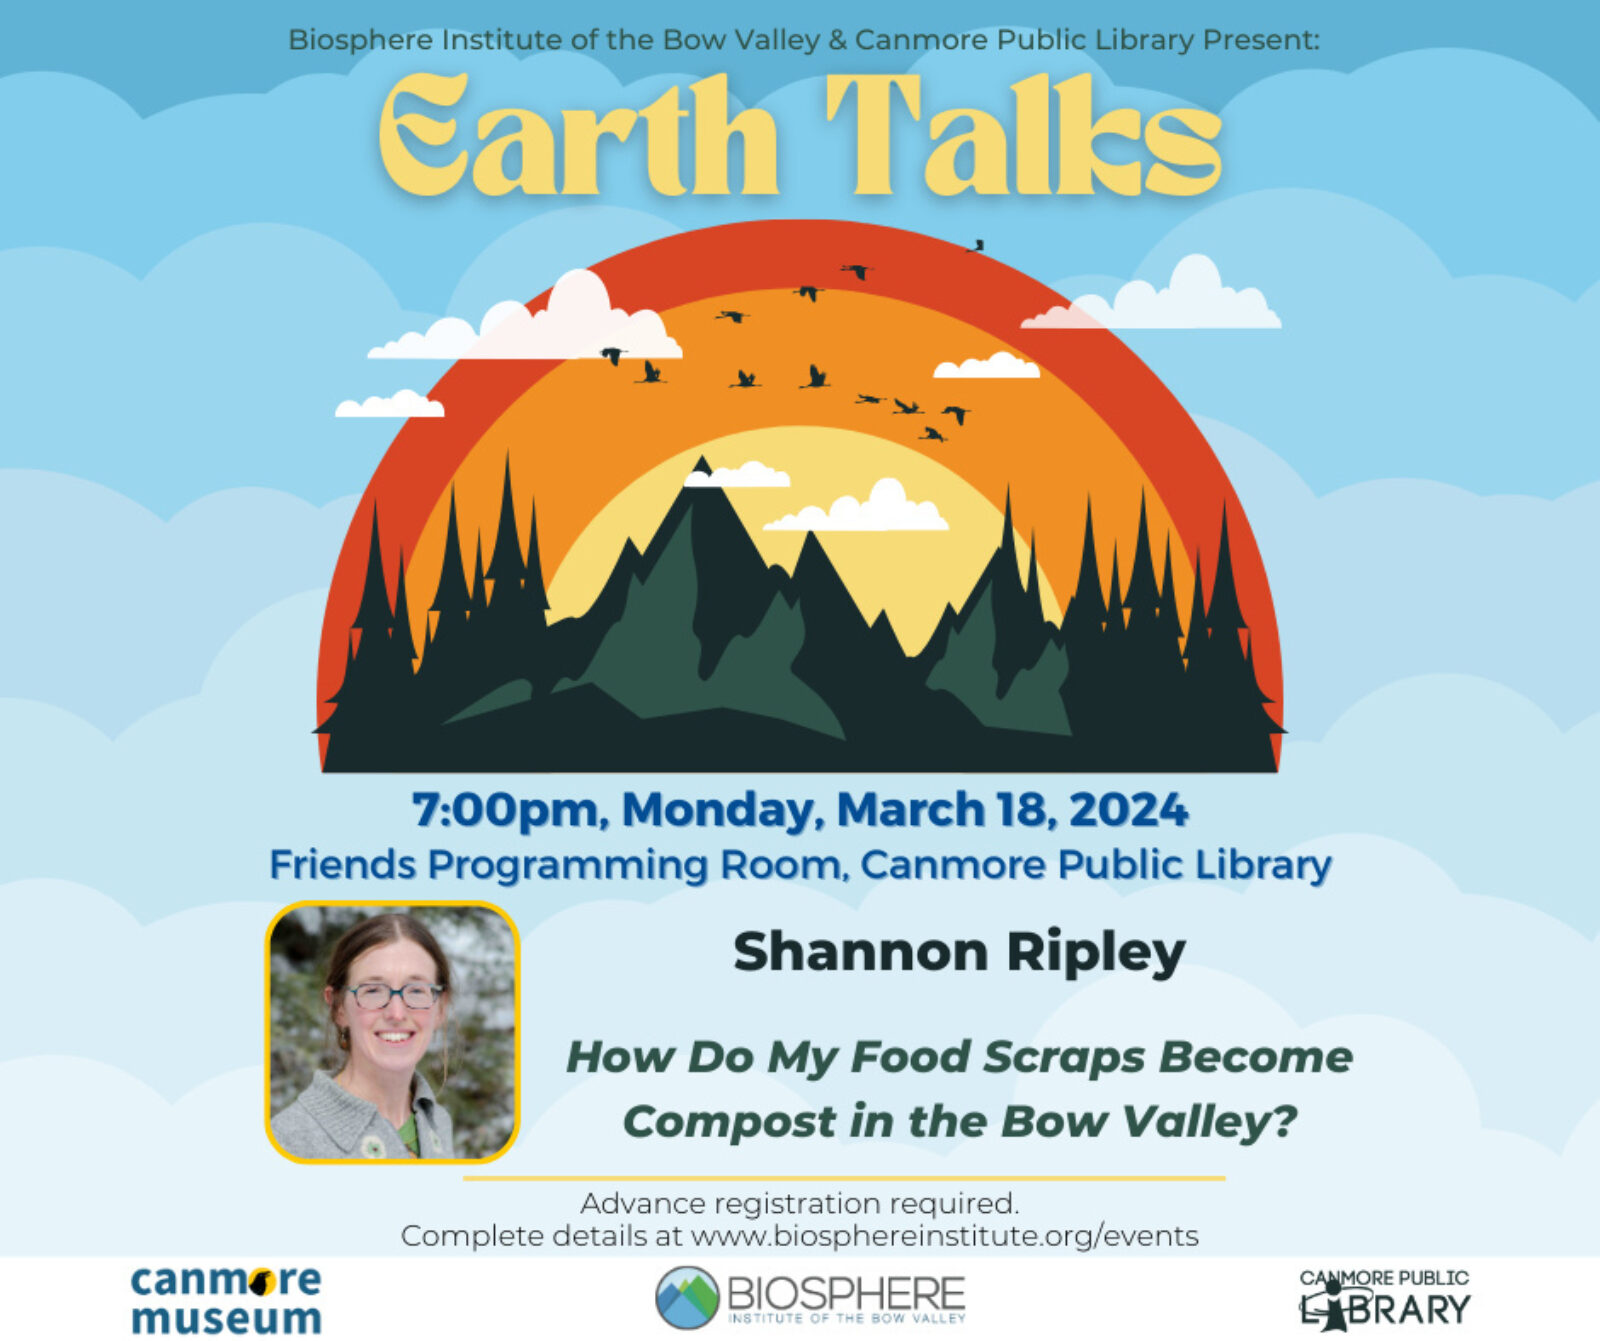 Earth Talk Composting March